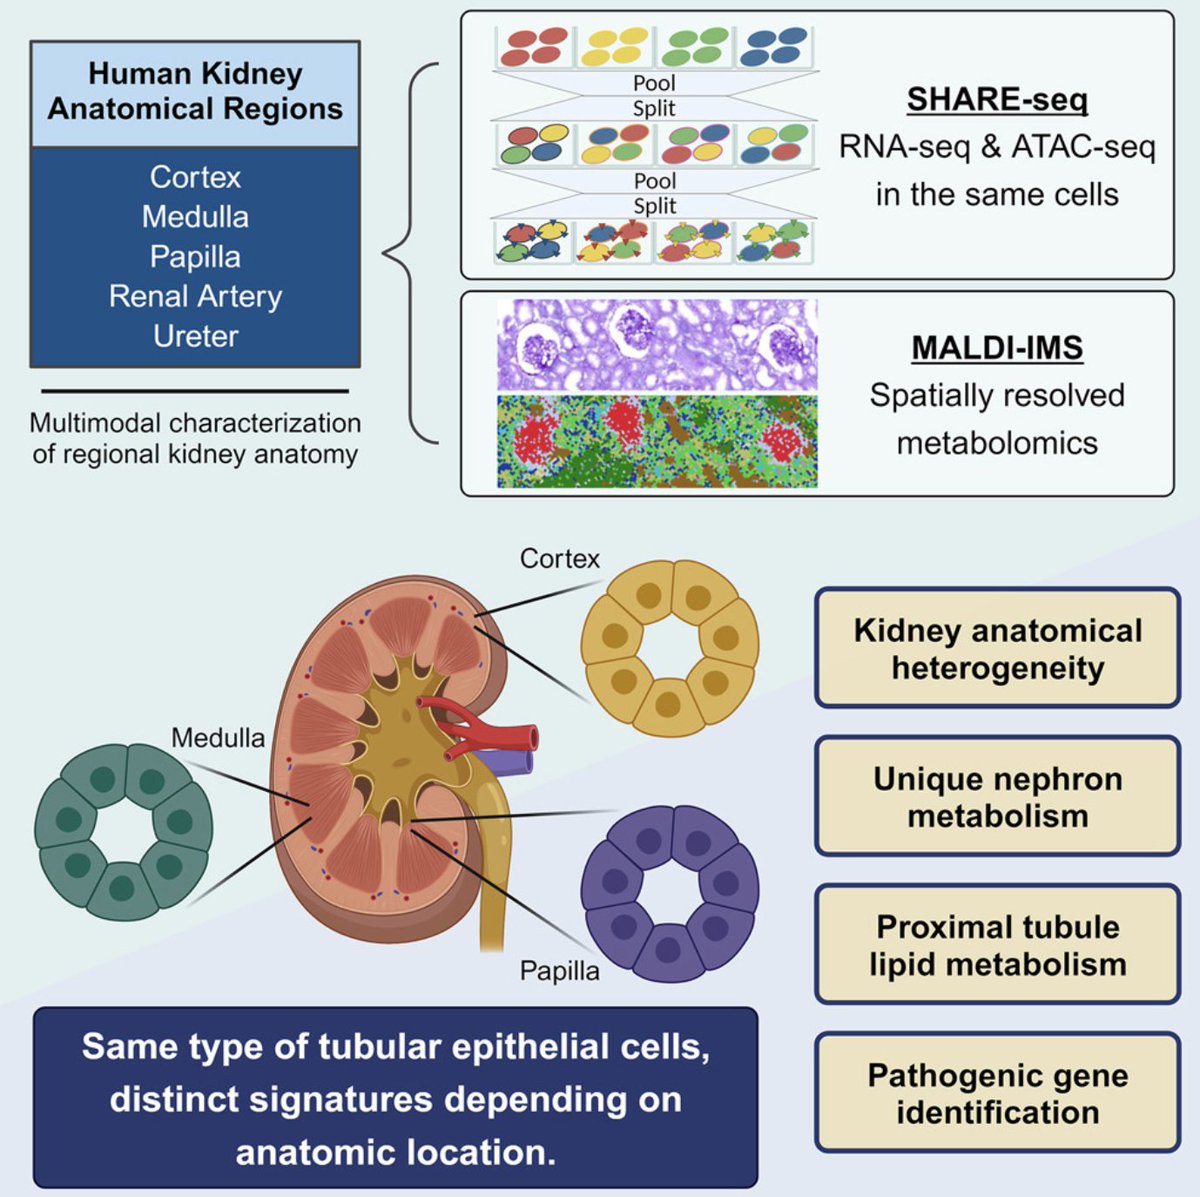 Excited to share our latest single cell multi-omic & spatial metabolomic work using SHARE-seq split-pool barcoding to profile regional kidney anatomy led by @HaikuoLi! authors.elsevier.com/sd/article/S15…